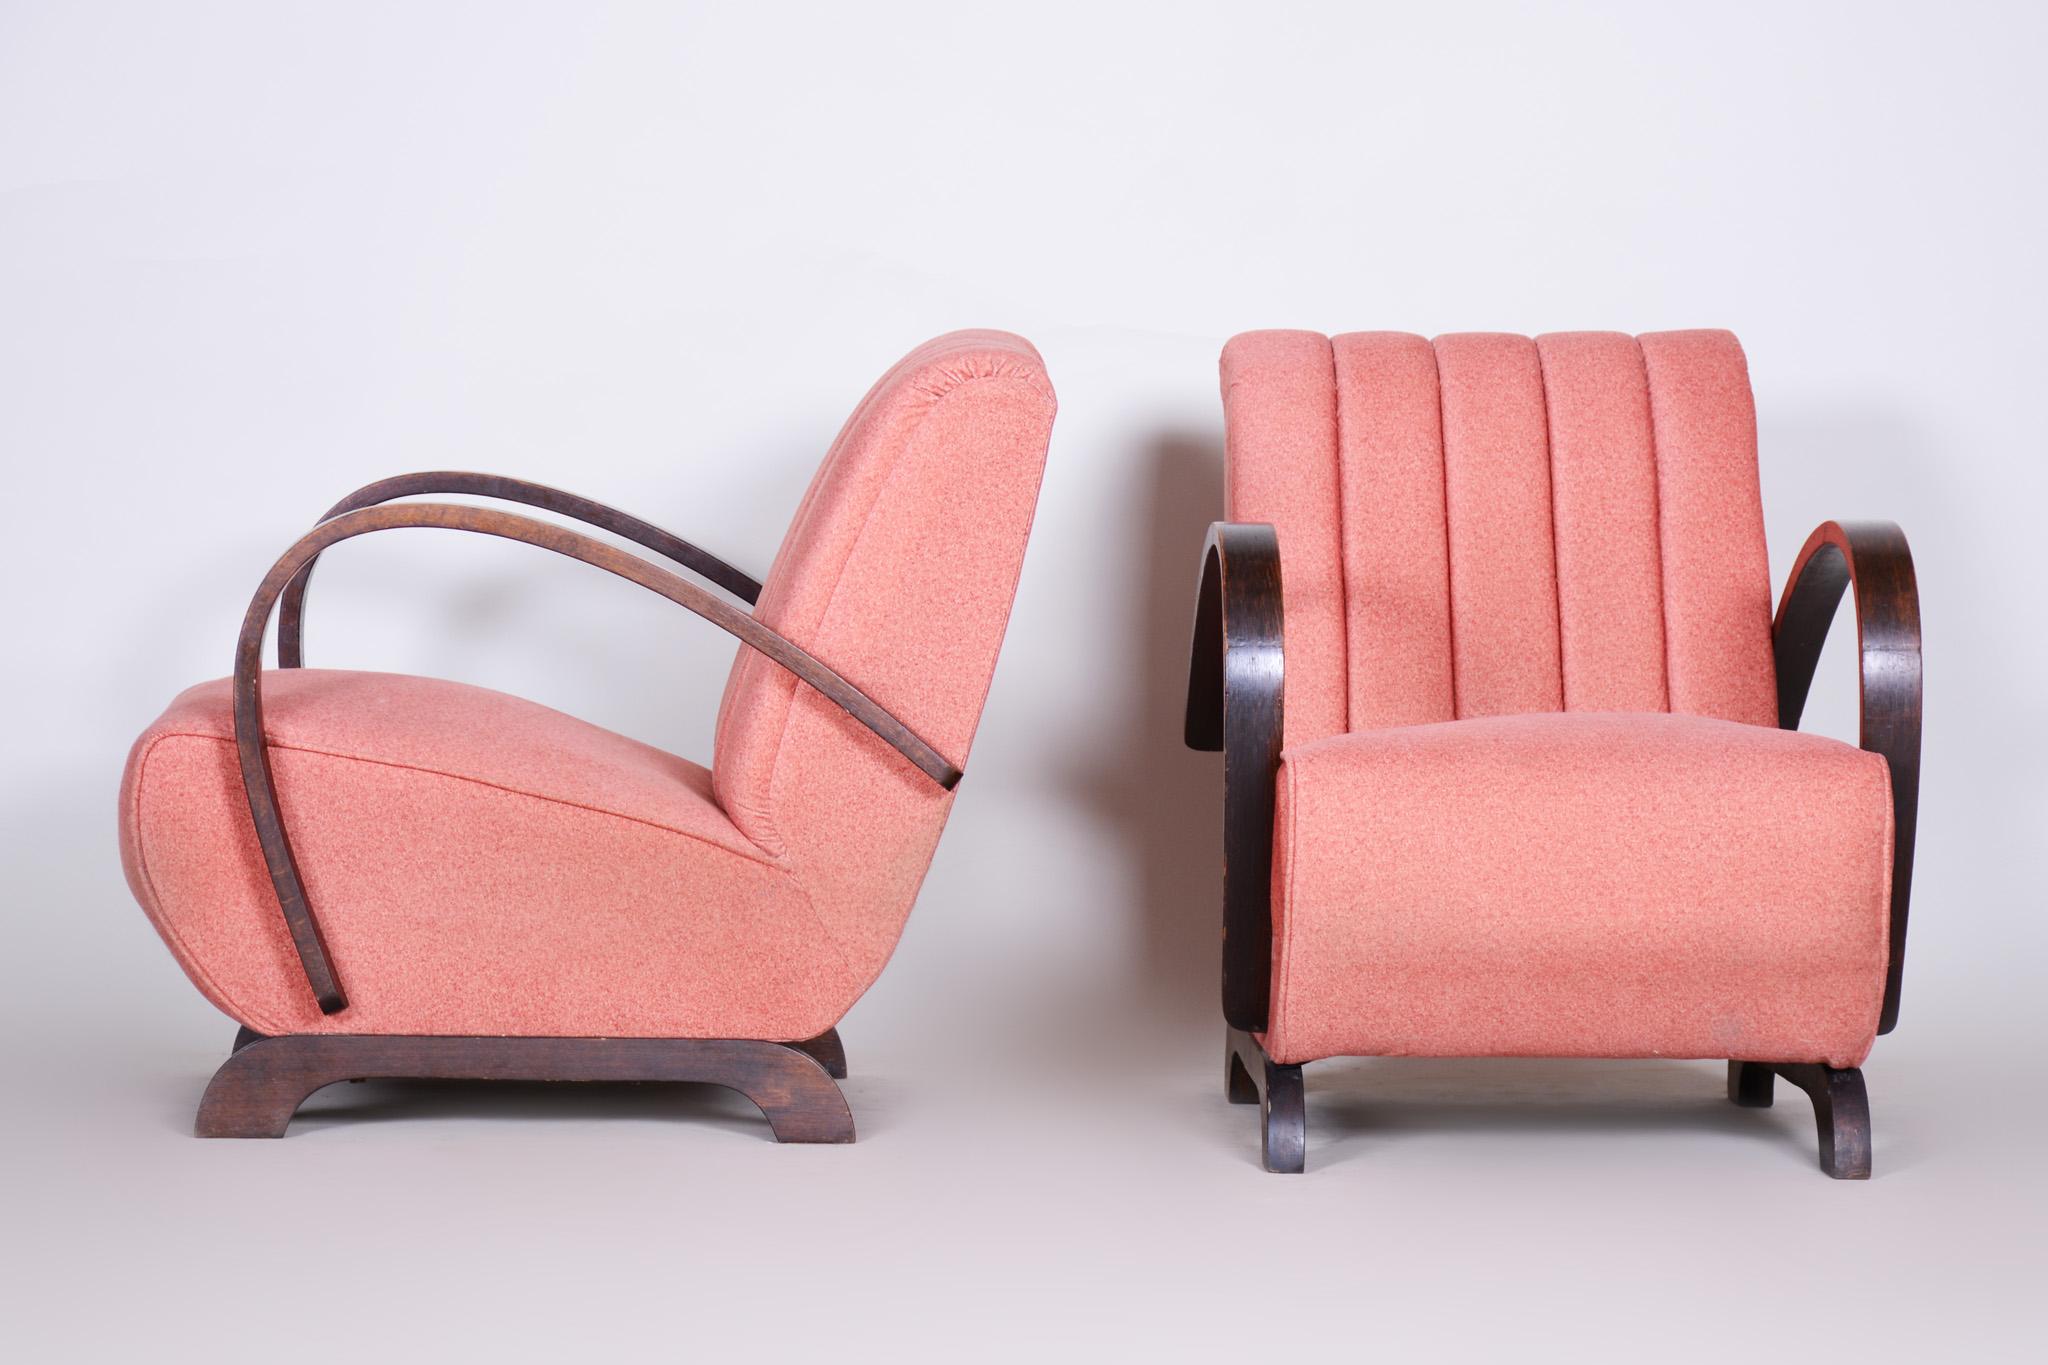 Pink Fabric Armchair Made in Czechia, 1930s, Original Condition, Art Deco Style In Good Condition For Sale In Horomerice, CZ